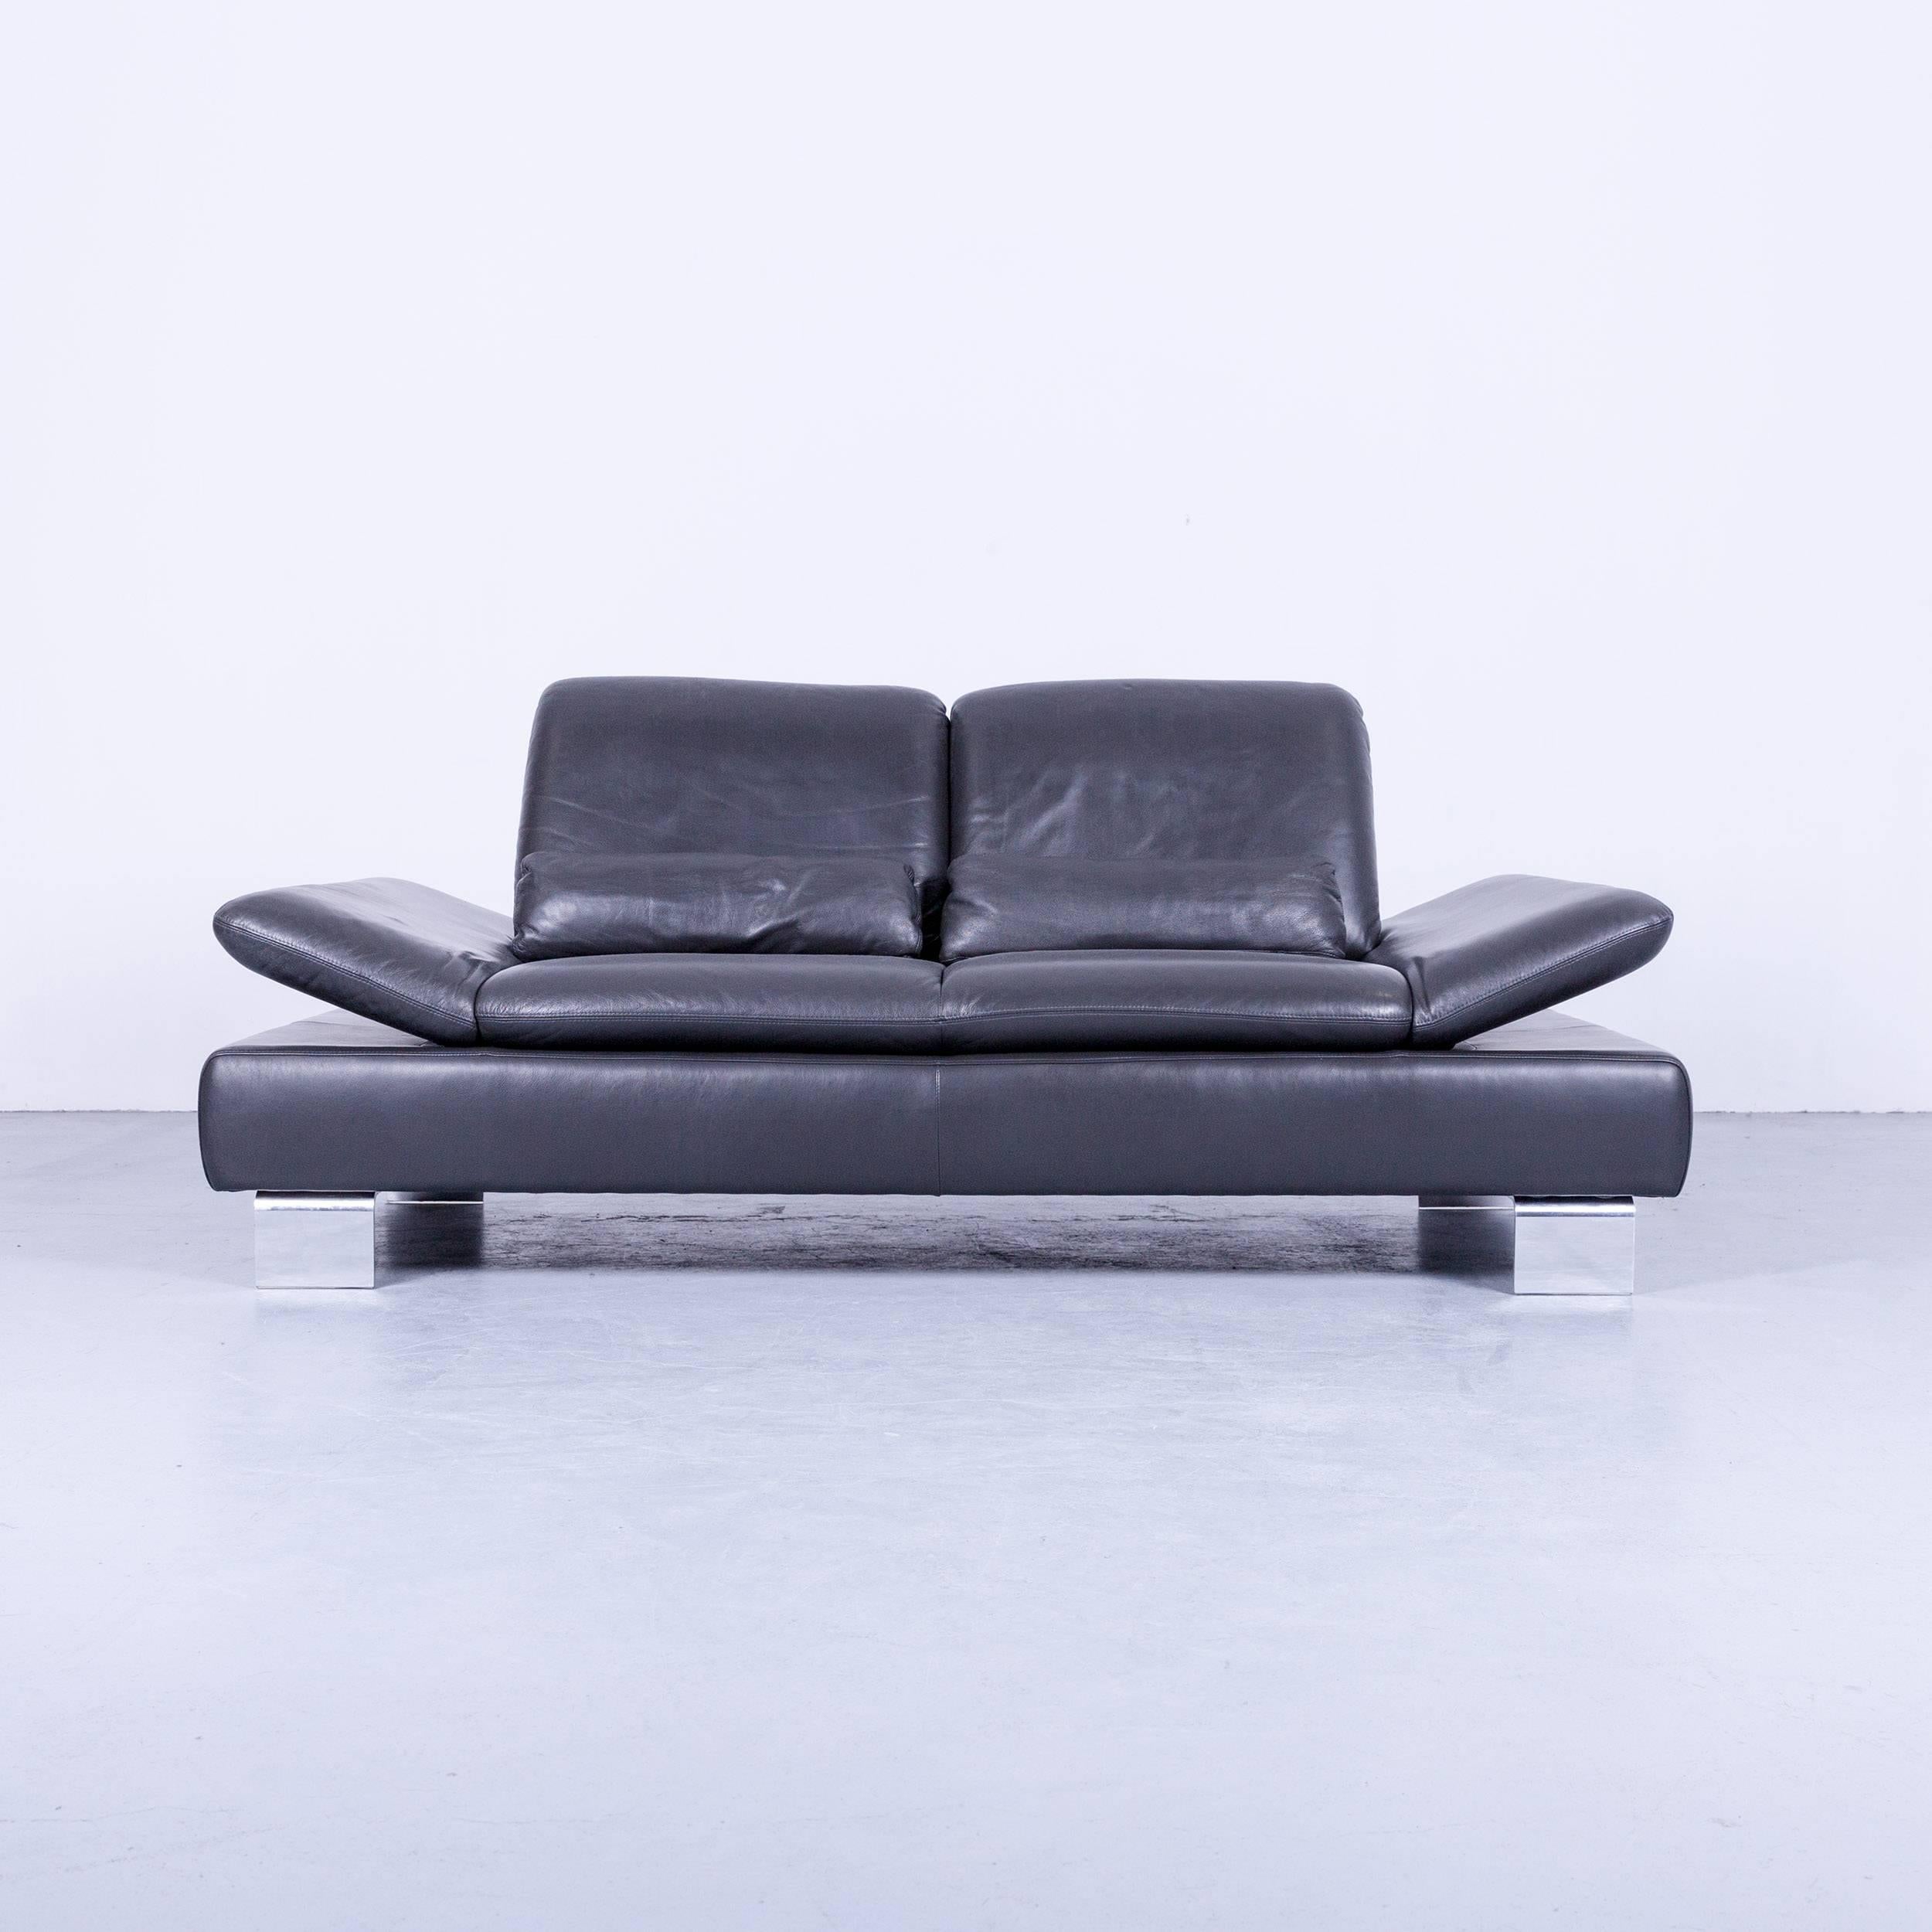 Anthracite colored original Willi Schillig designer leather sofa, in a minimalistic and modern design, made for pure comfort and style.